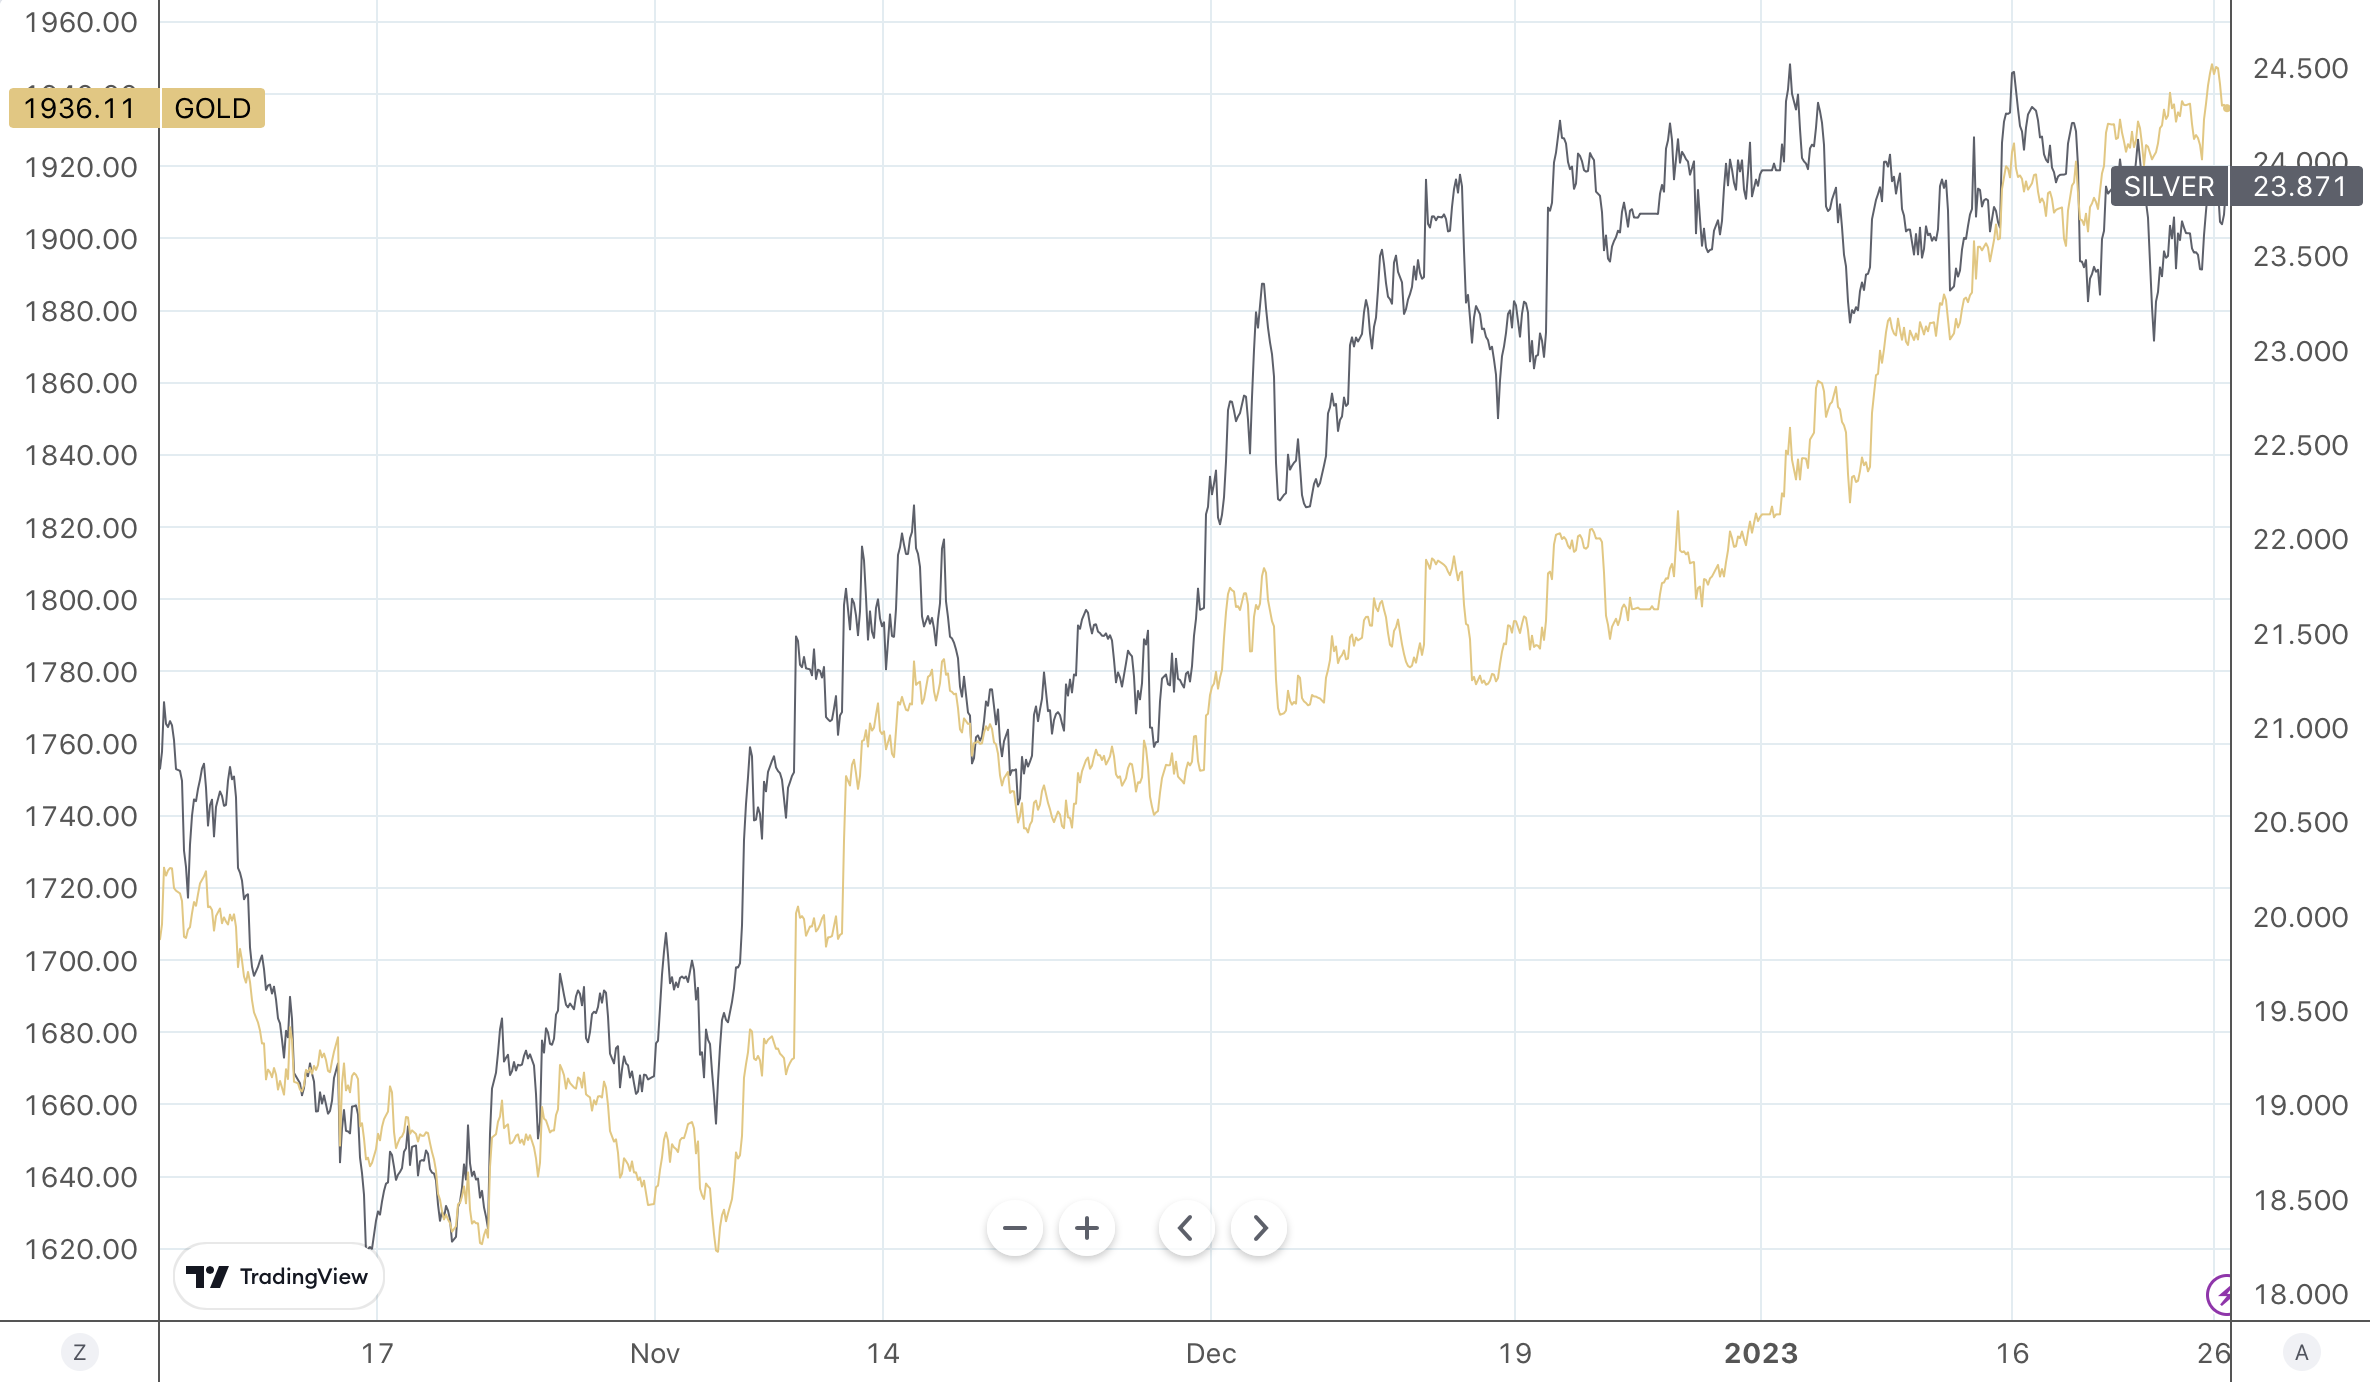 overlay line chart showing gold and silver's performance from Nov 22 to present